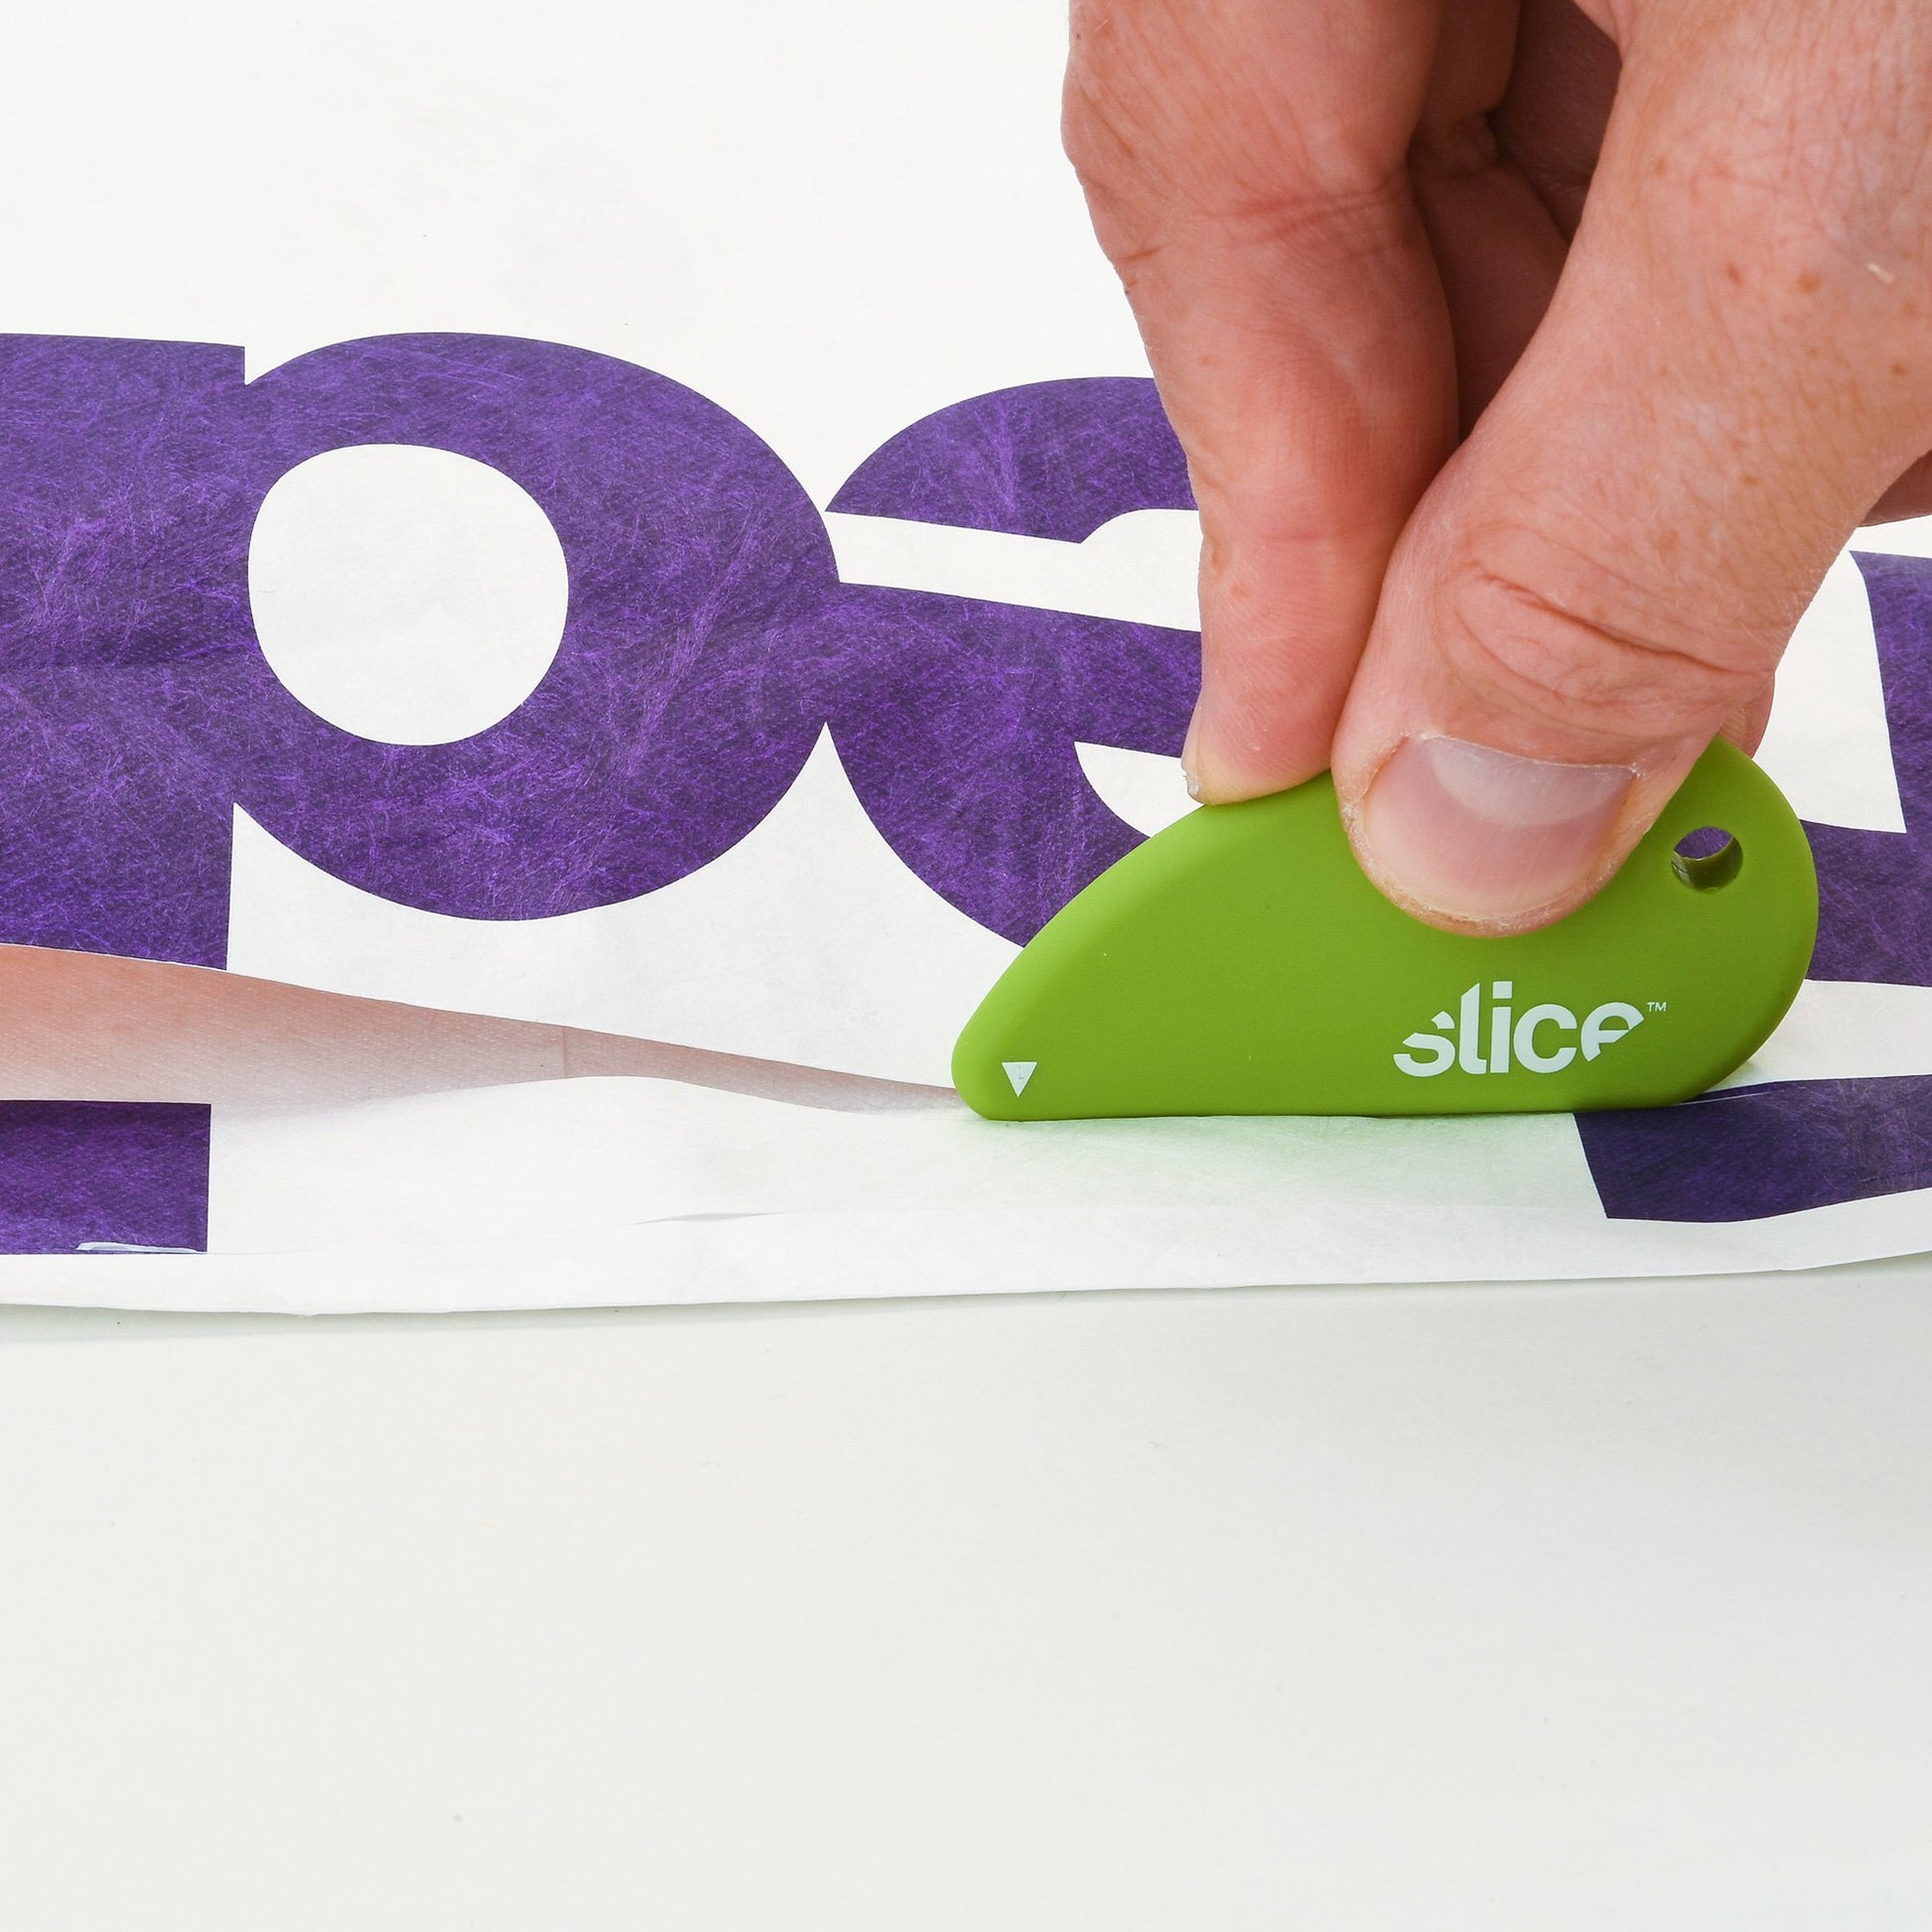 Compact & Protected: Mini Scissors for Safe & Precise Paper Cutting